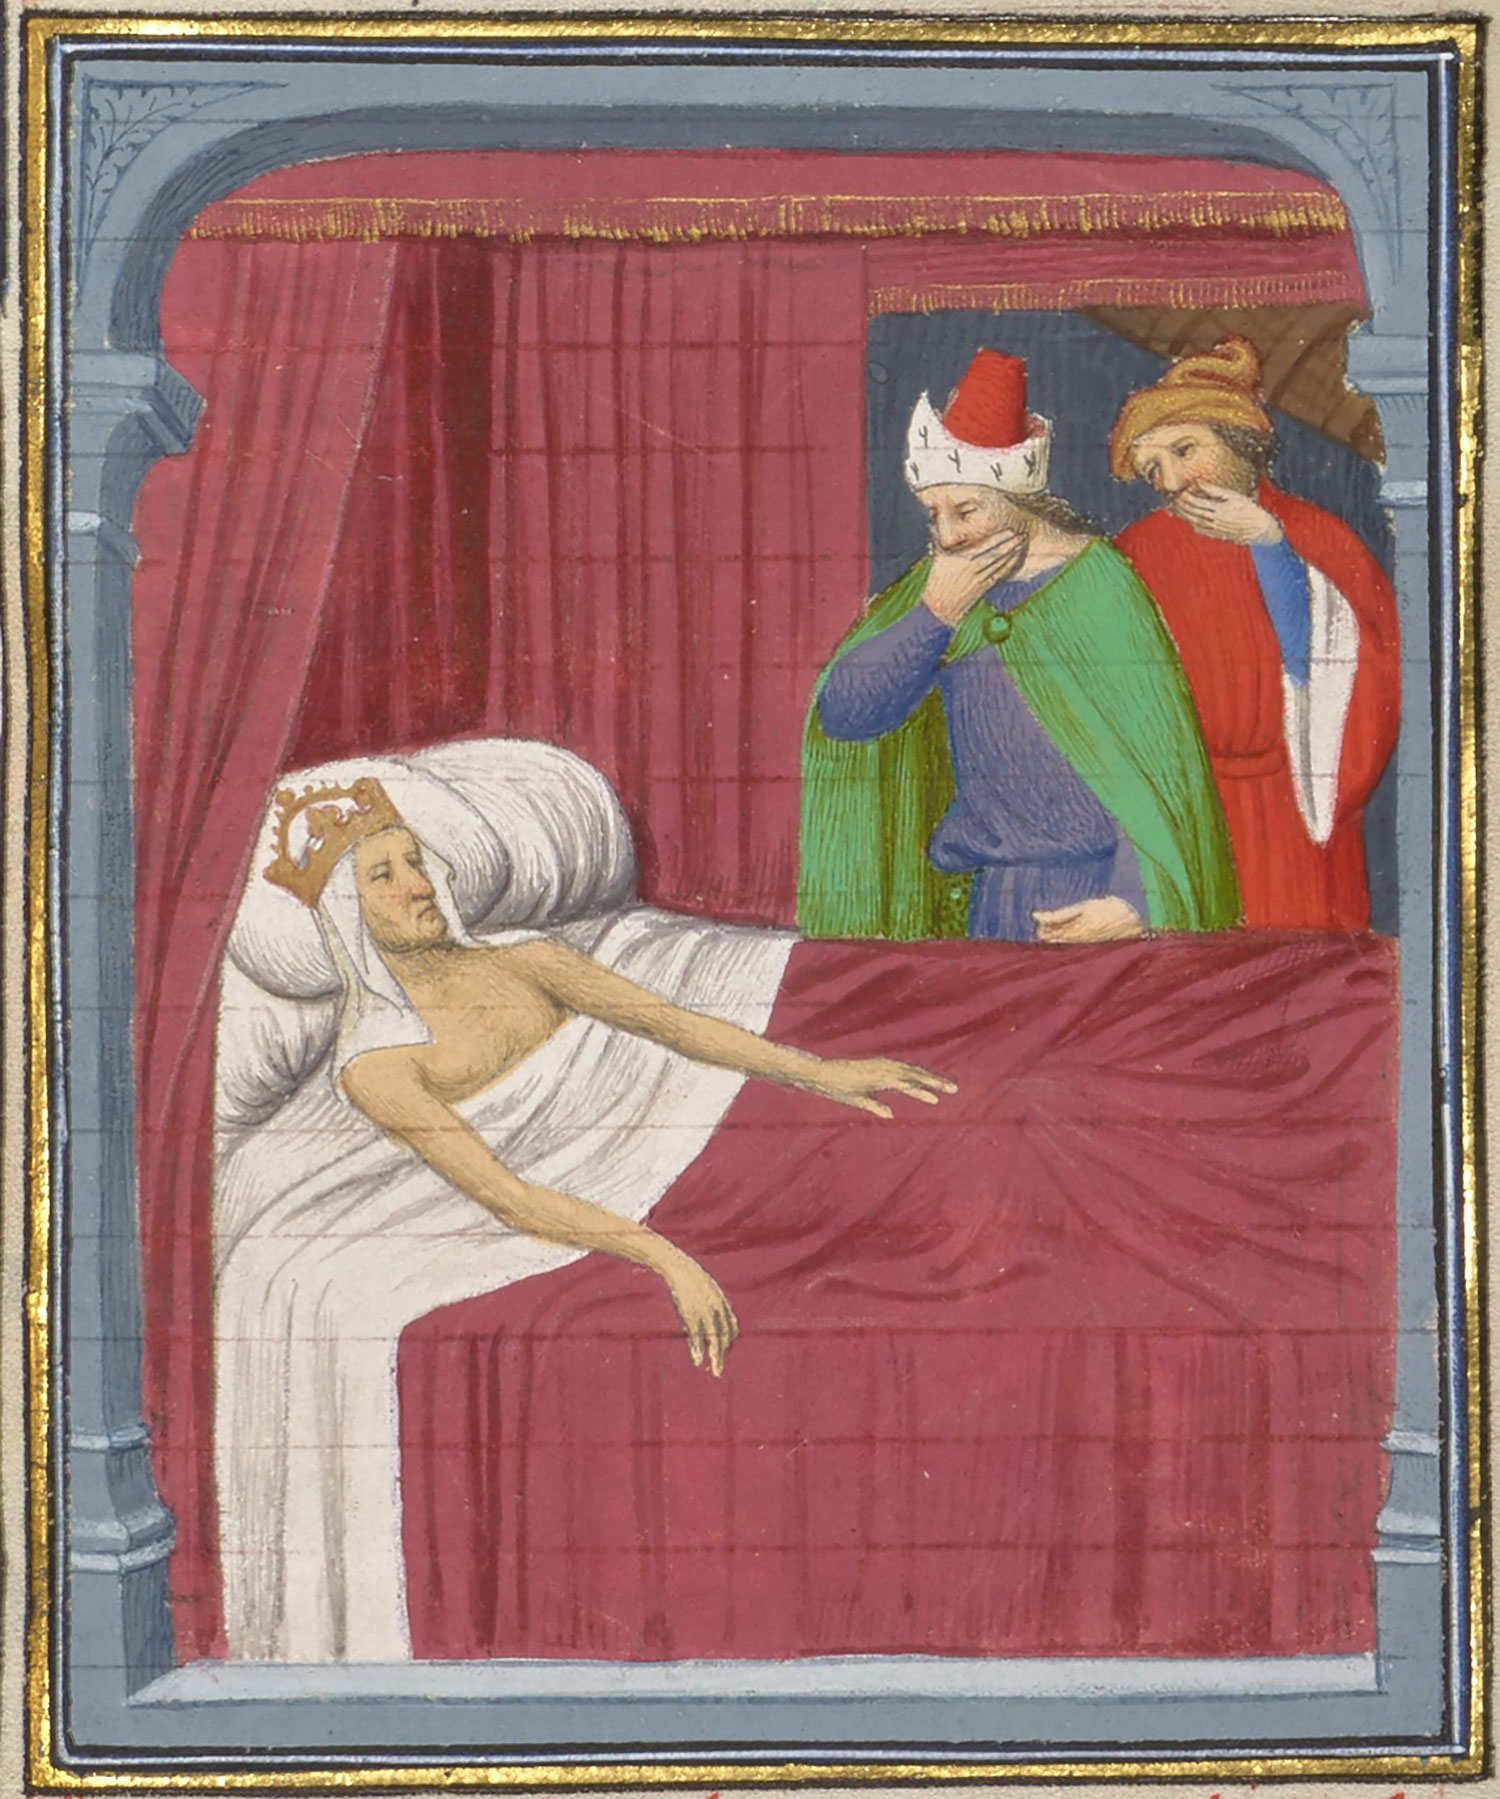 Courtiers cover their noses at the deathbed of the Emperor Galerius